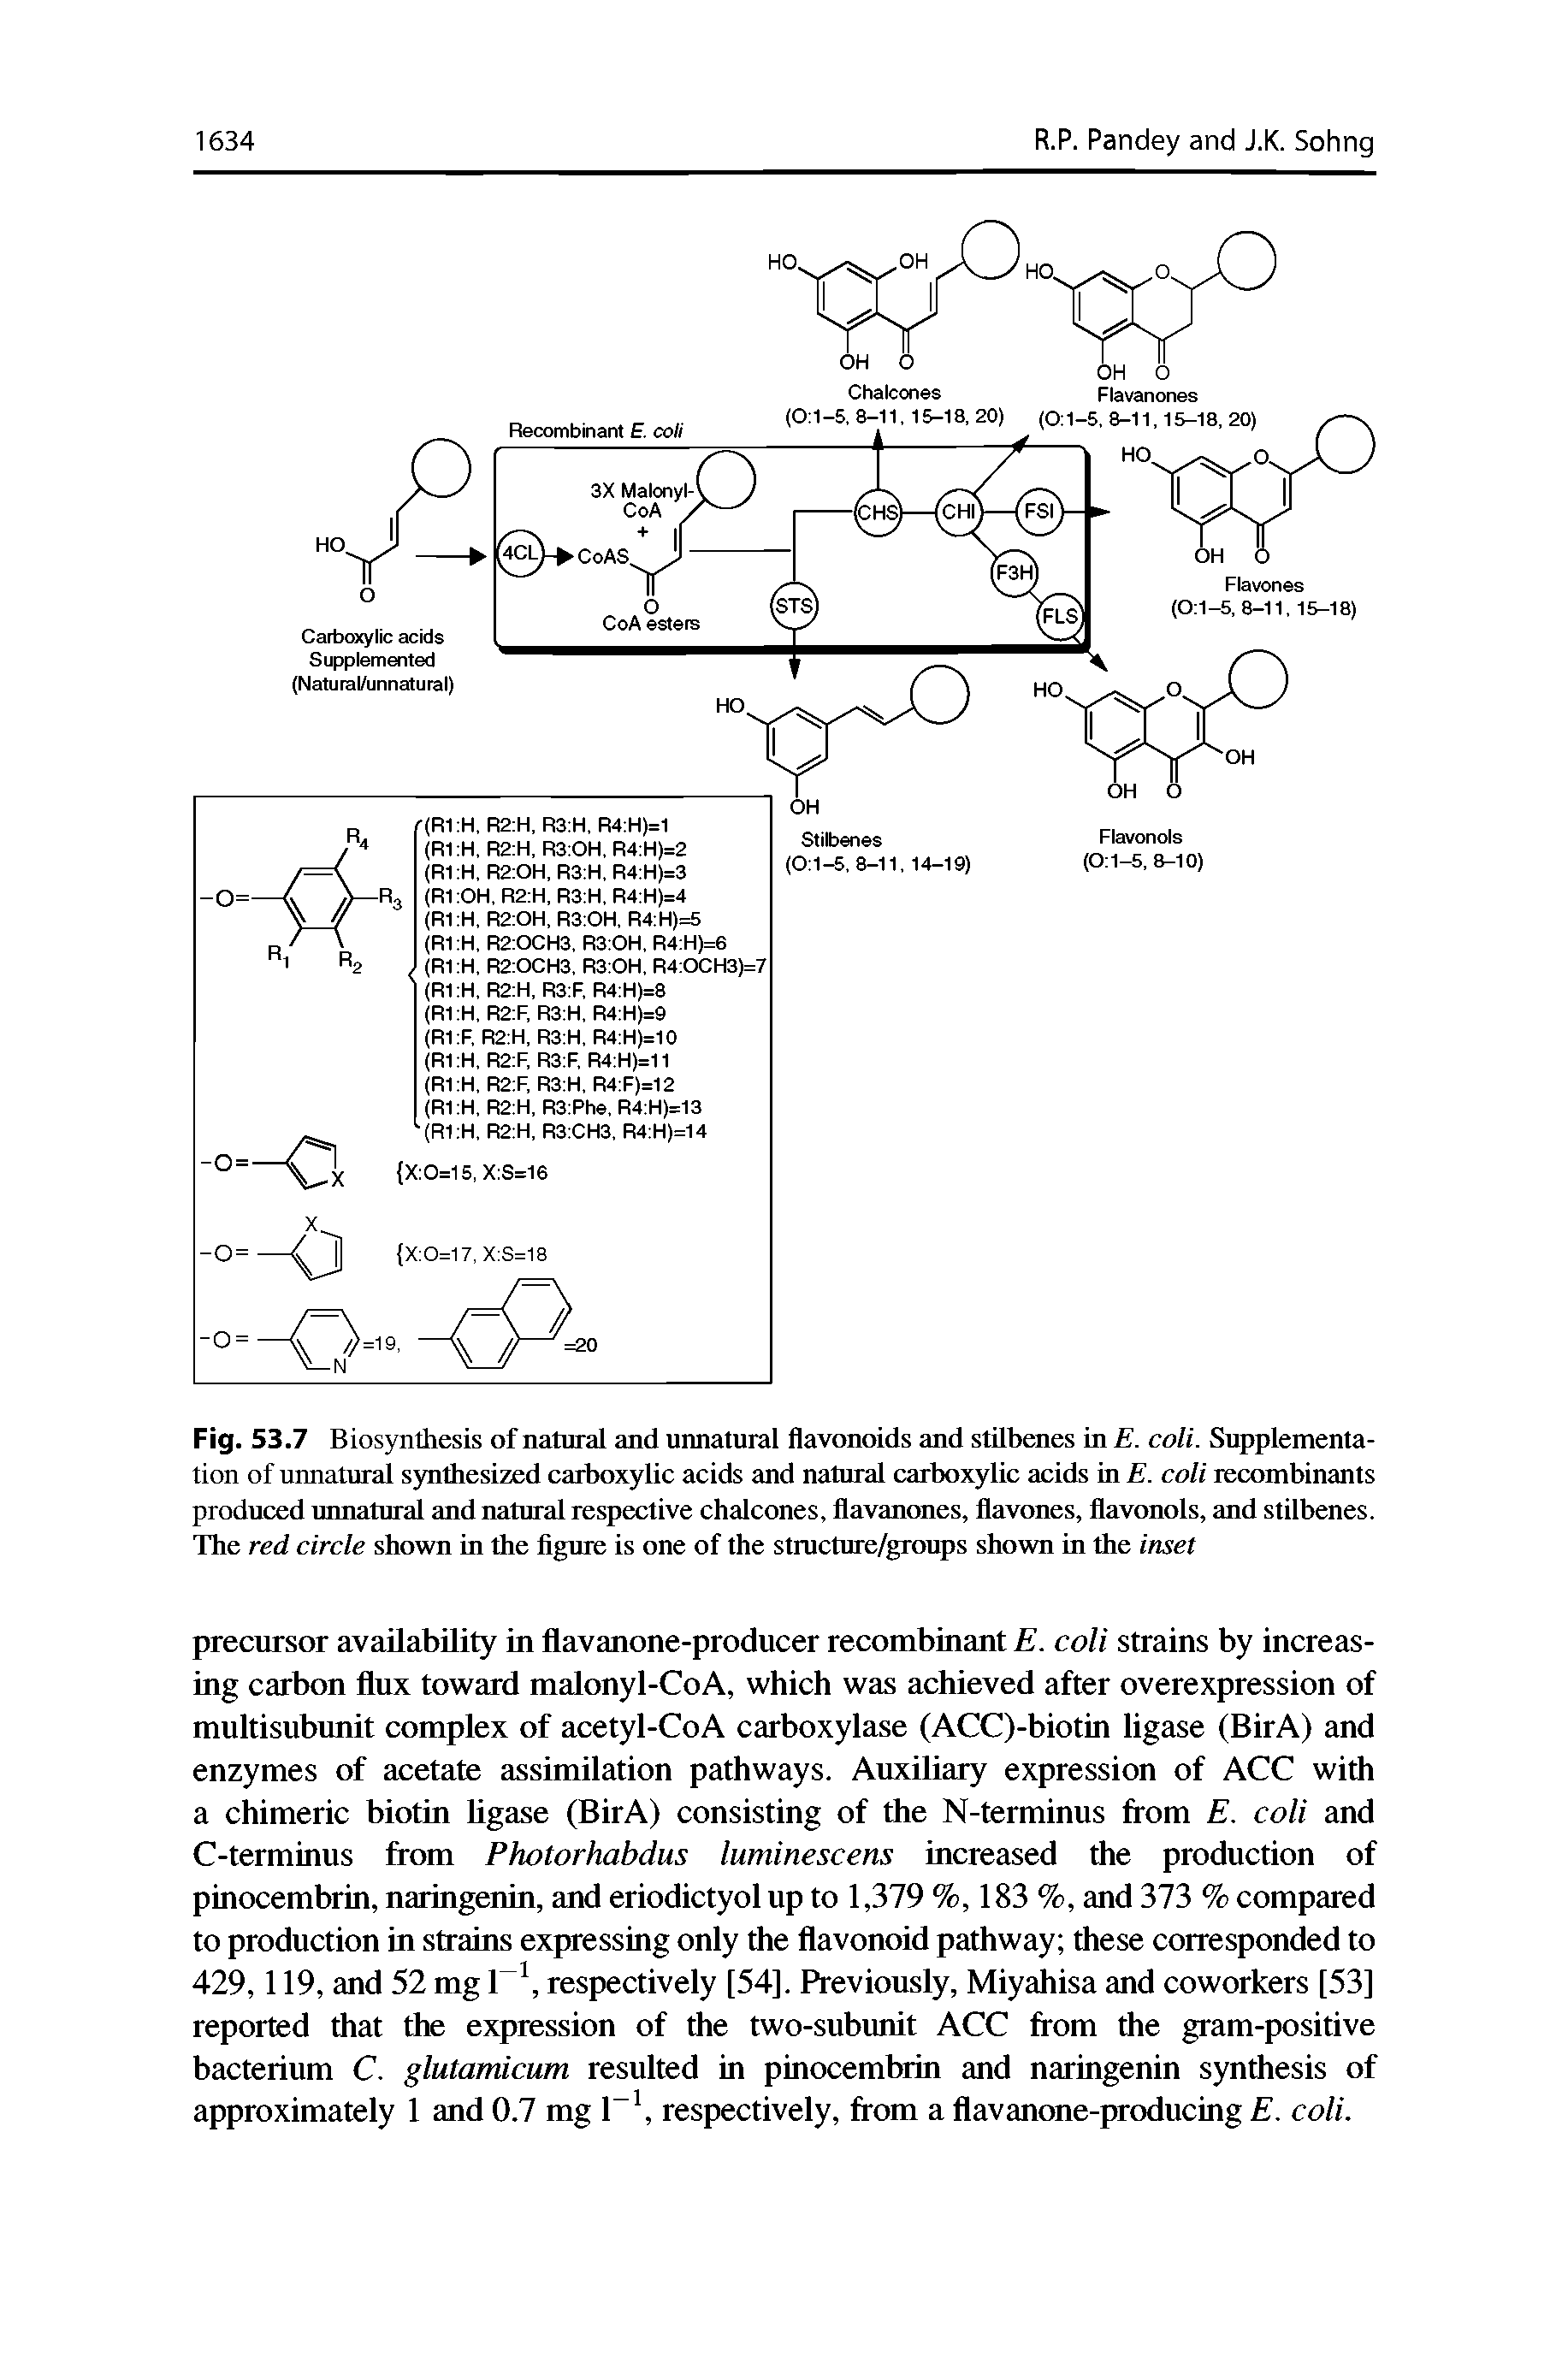 Fig. 53.7 Biosynthesis of natural and unnatural flavonoids and stillxaies in E. coli. Supplementation of unnatural synthesized carboxylic acids and natural carboxylic acids in E. coli recombinants produced unnatural and natural respective chalcones, flavanones, flavones, flavonols, and stilbenes. The red circle shown in the figure is one of the structure/groups shown in the inset...